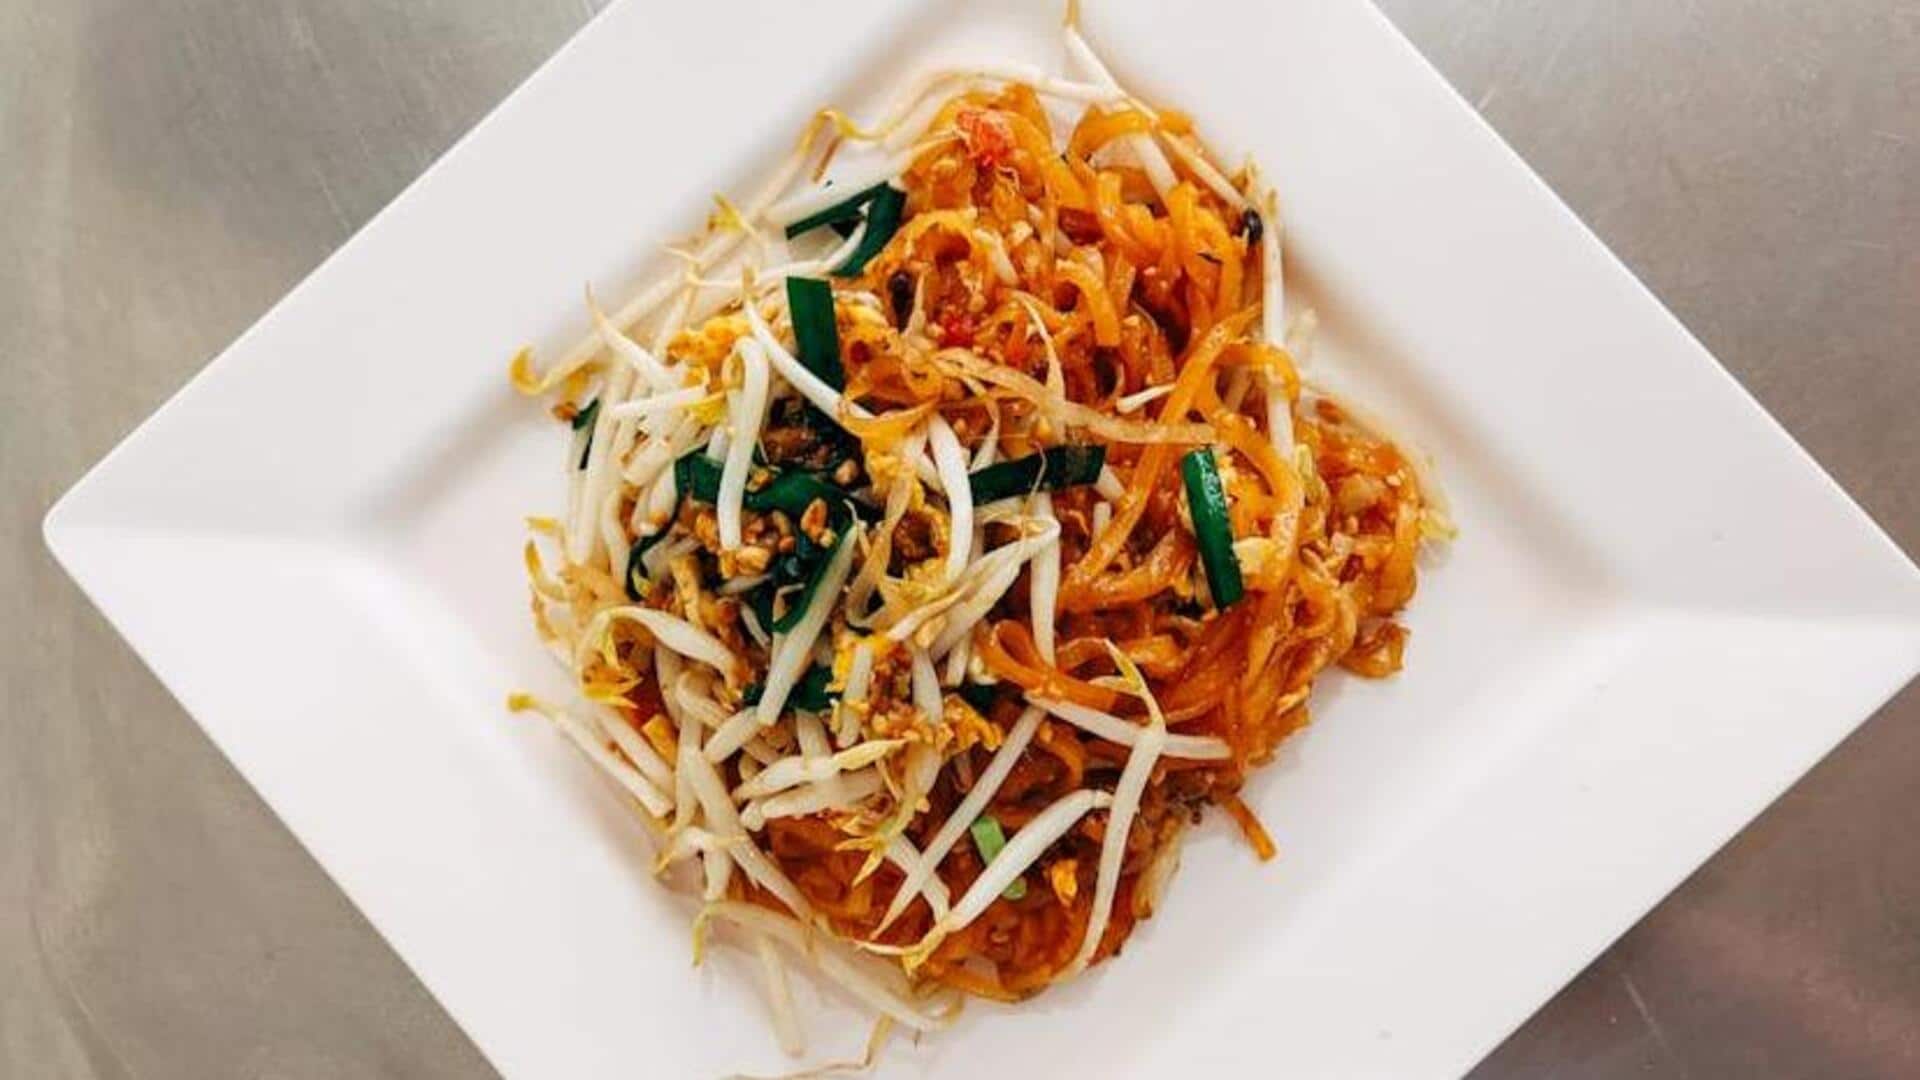 Try this tofu pad Thai recipe for a flavorsome day